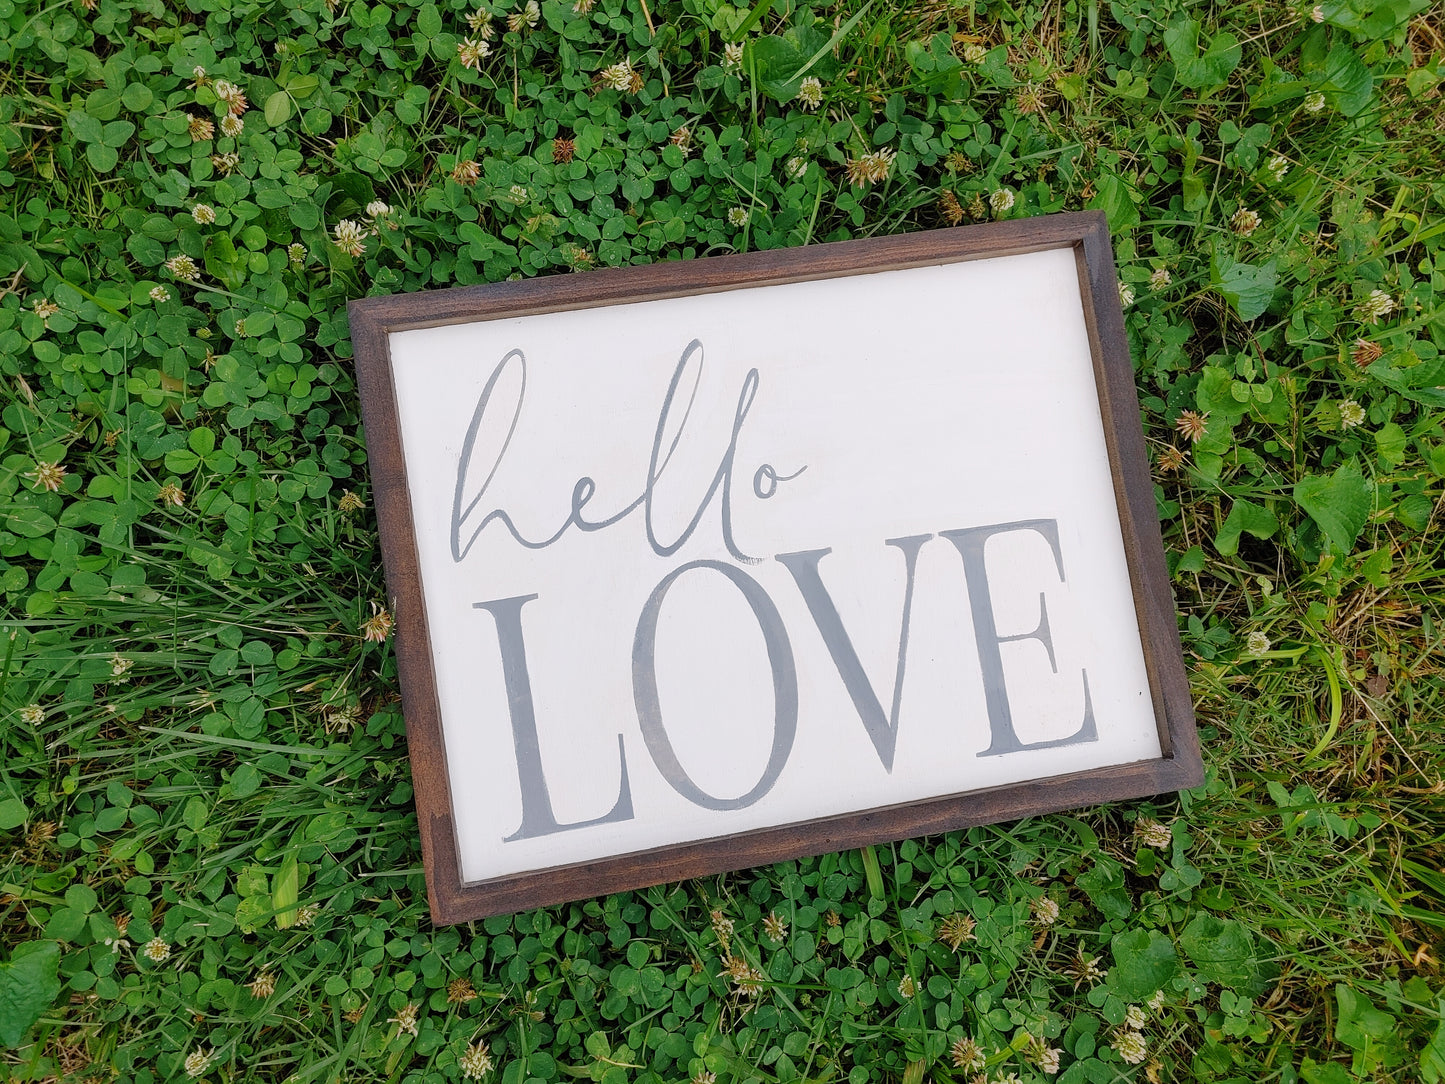 hello love - large bedroom sign